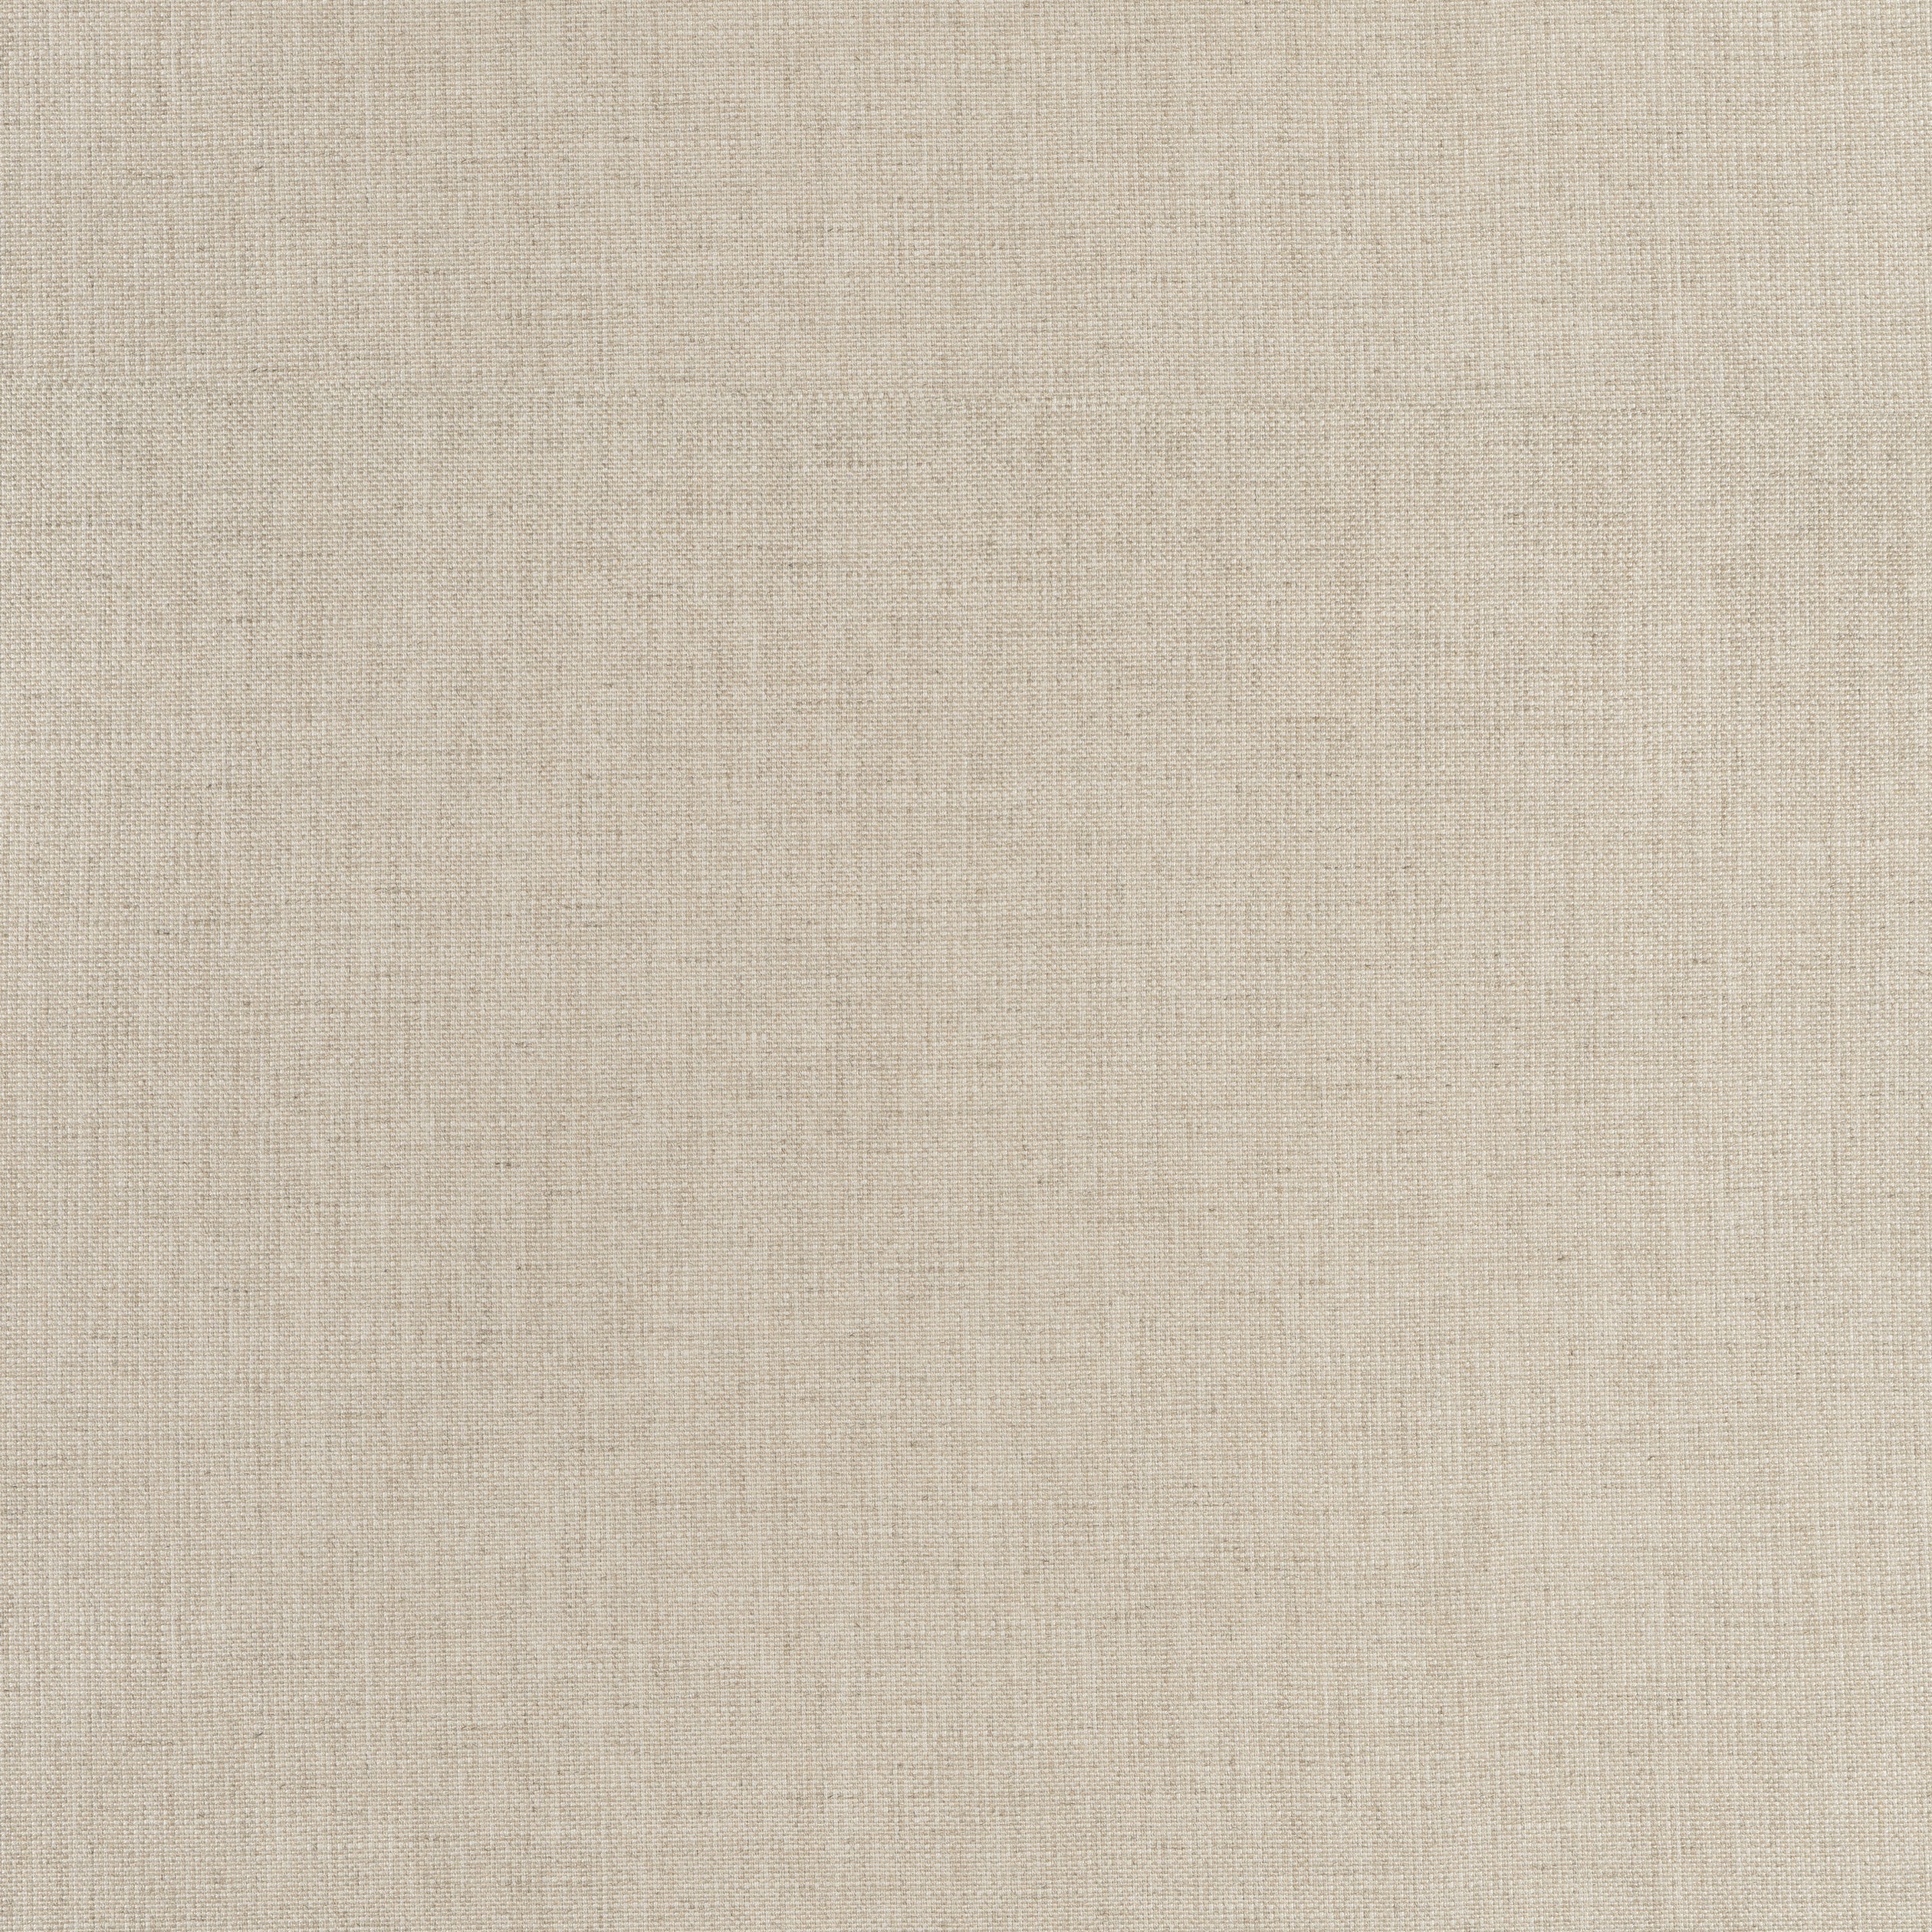 Ambient fabric in lichen color - pattern number W75203 - by Thibaut in the Elements collection